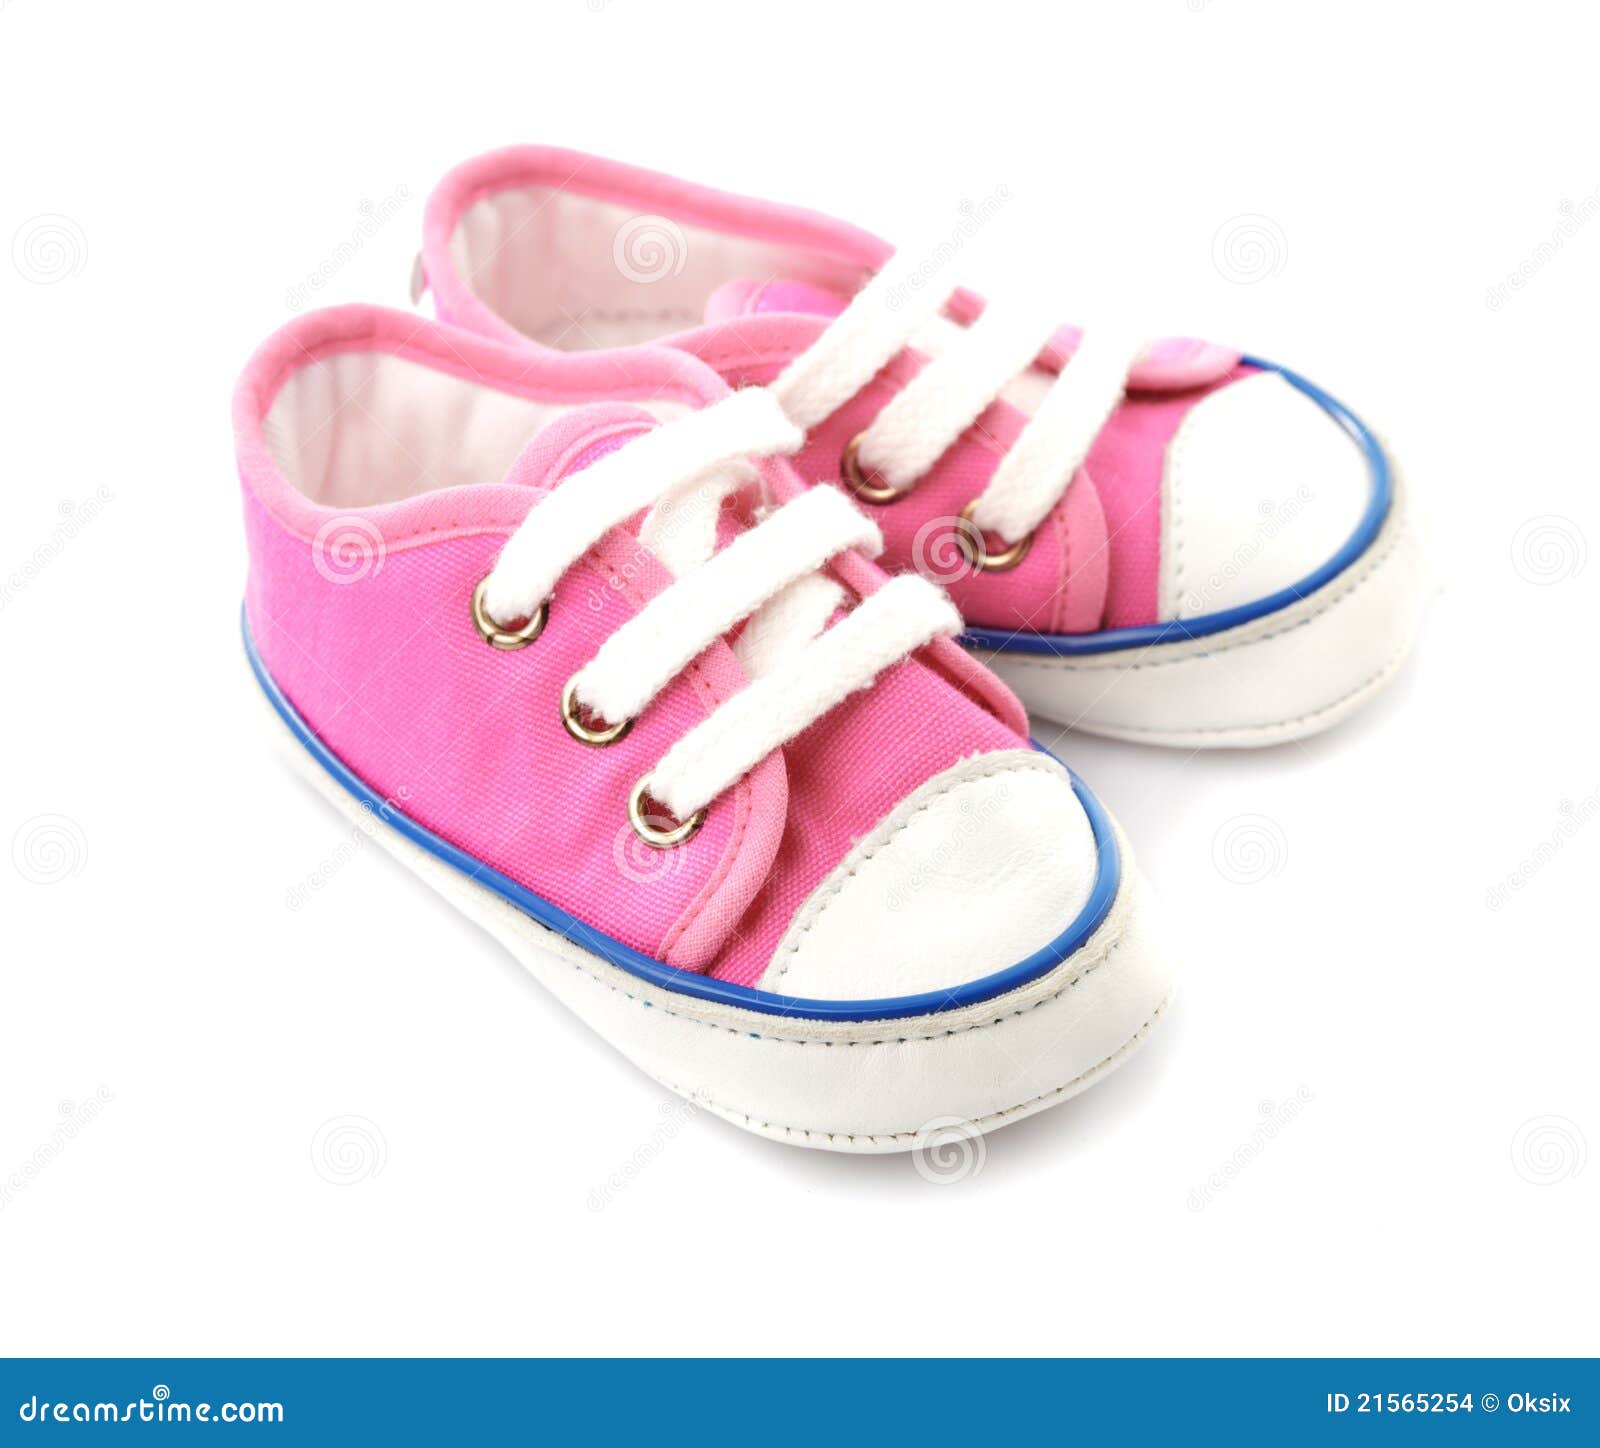 Pink baby shoes stock photo. Image of element, objects - 21565254